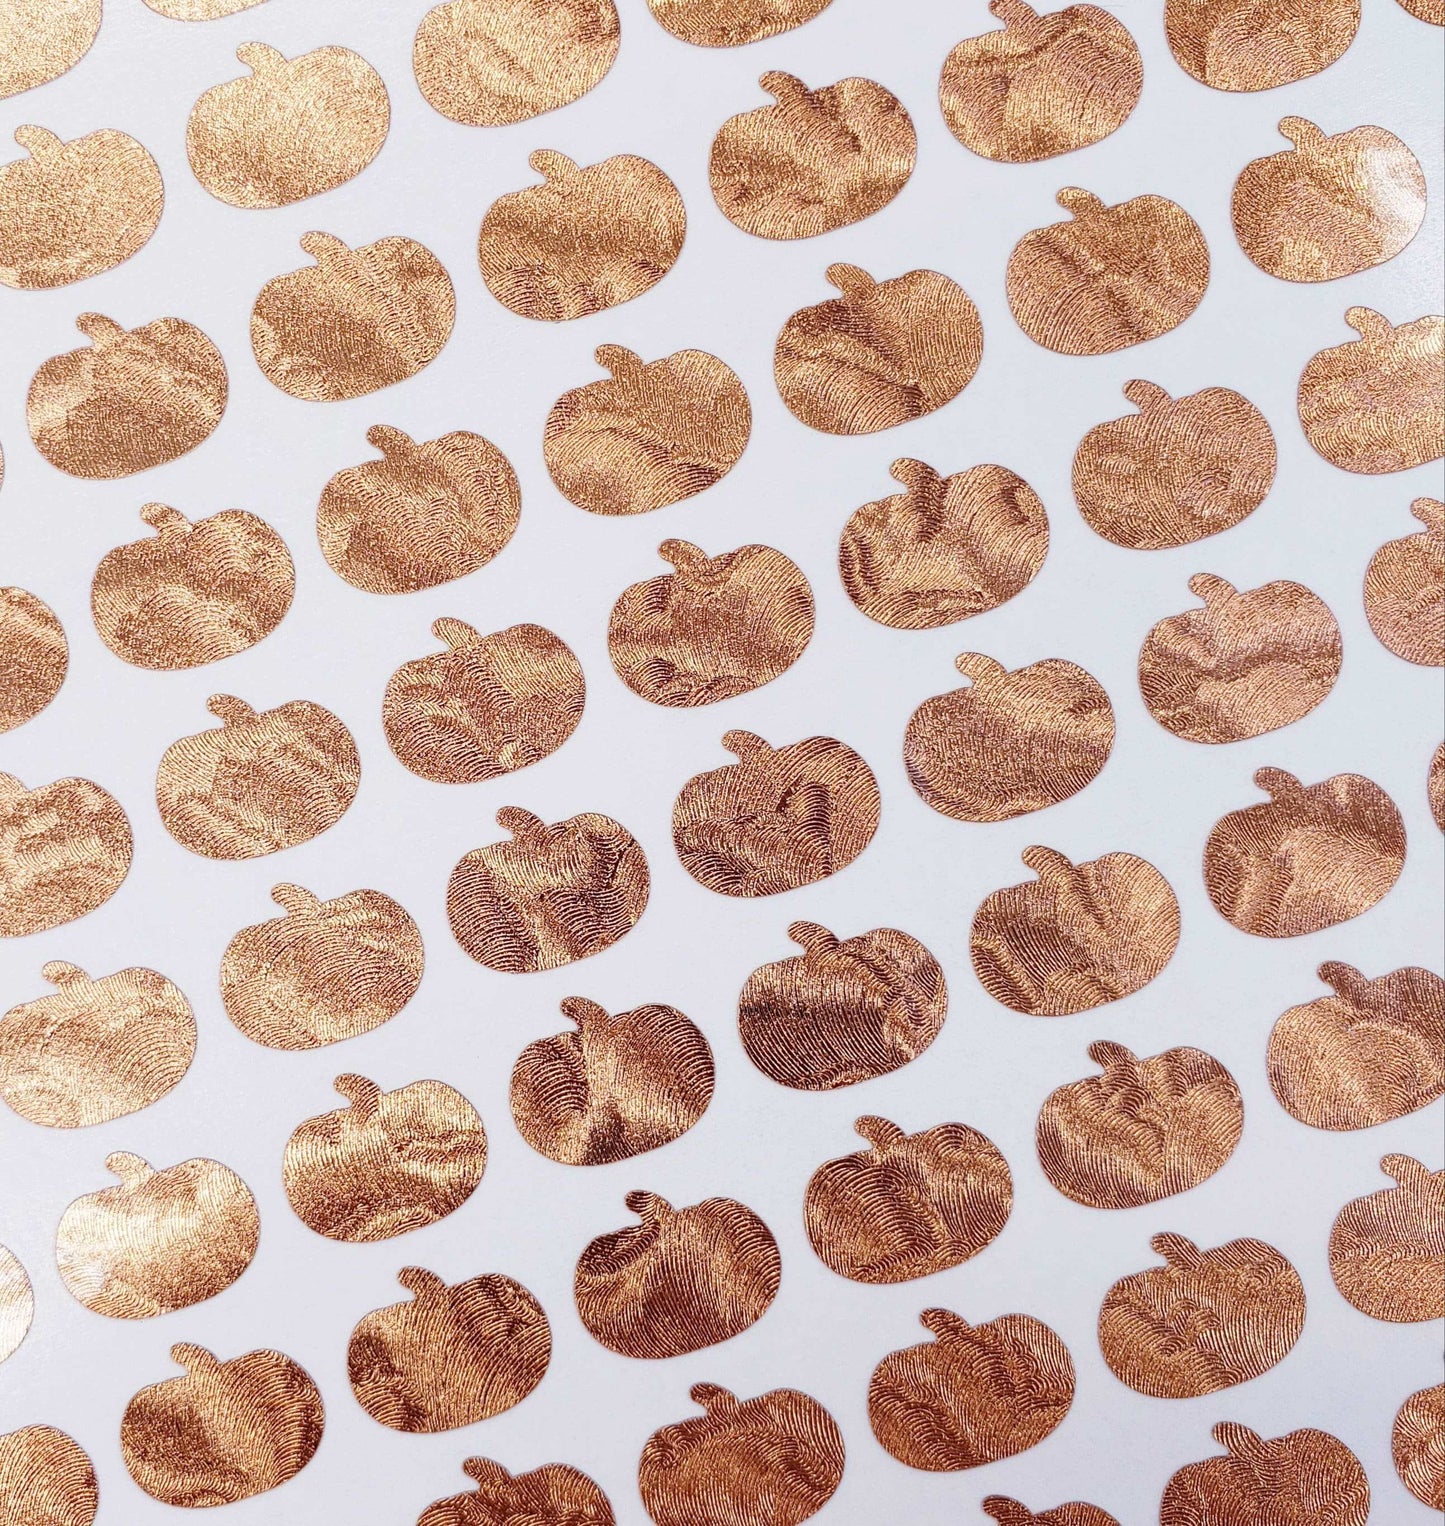 Copper Pumpkin Stickers, set of 100, 200 or 300 little rose gold pumpkin adhesive decals, Halloween and Fall season decorative stickers